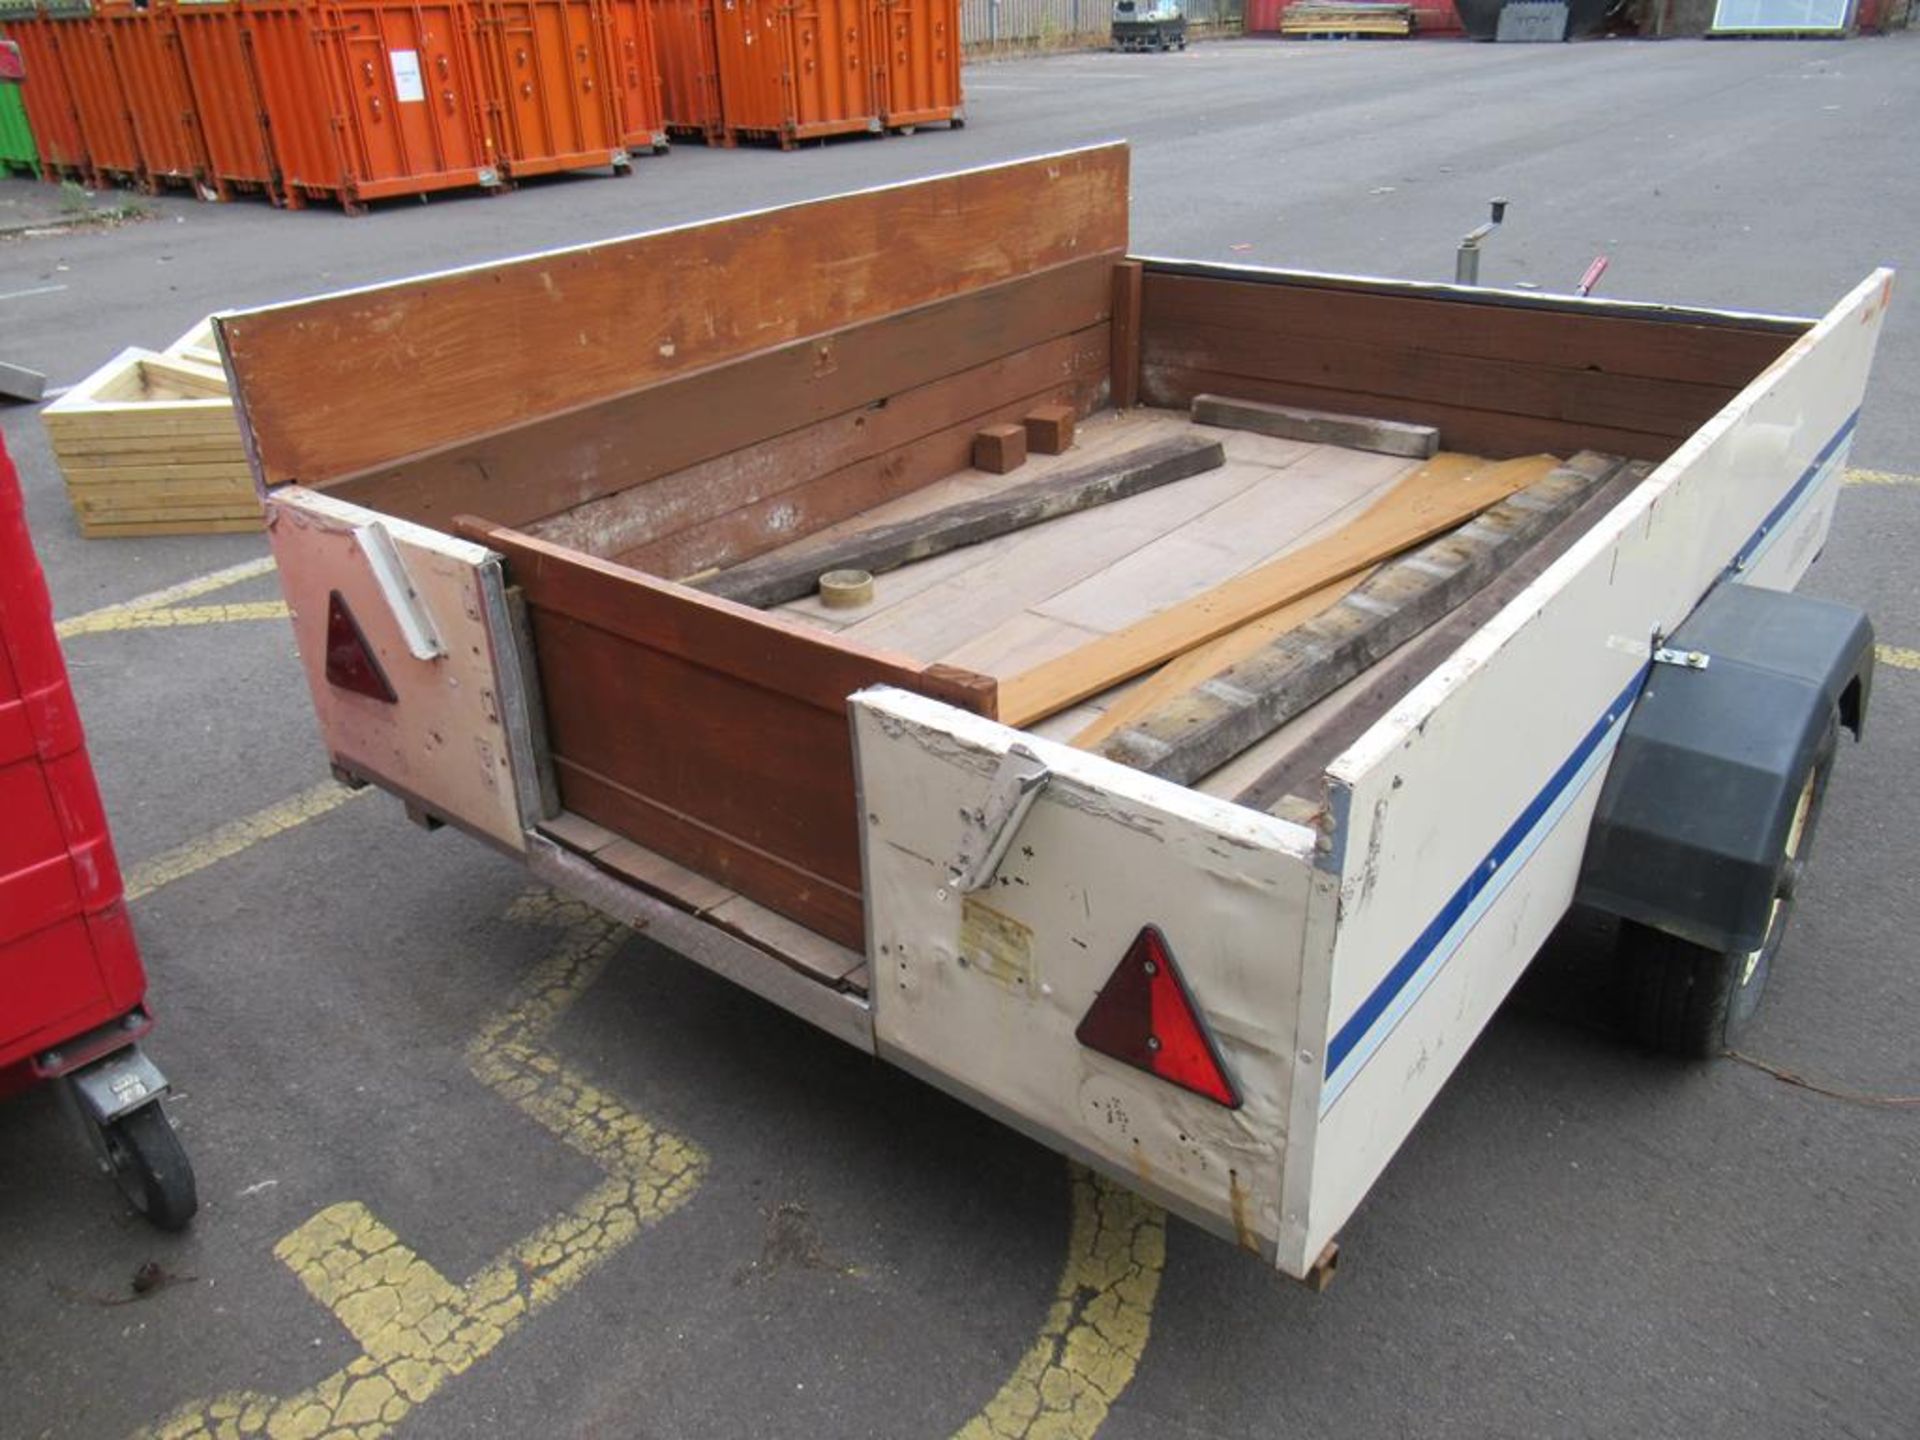 A Single Axel Trailer THIS TRAILOR HAS NO LIGHTS SO WILL NEED A LIGHT BAR TO TOW AWAY - Image 6 of 6